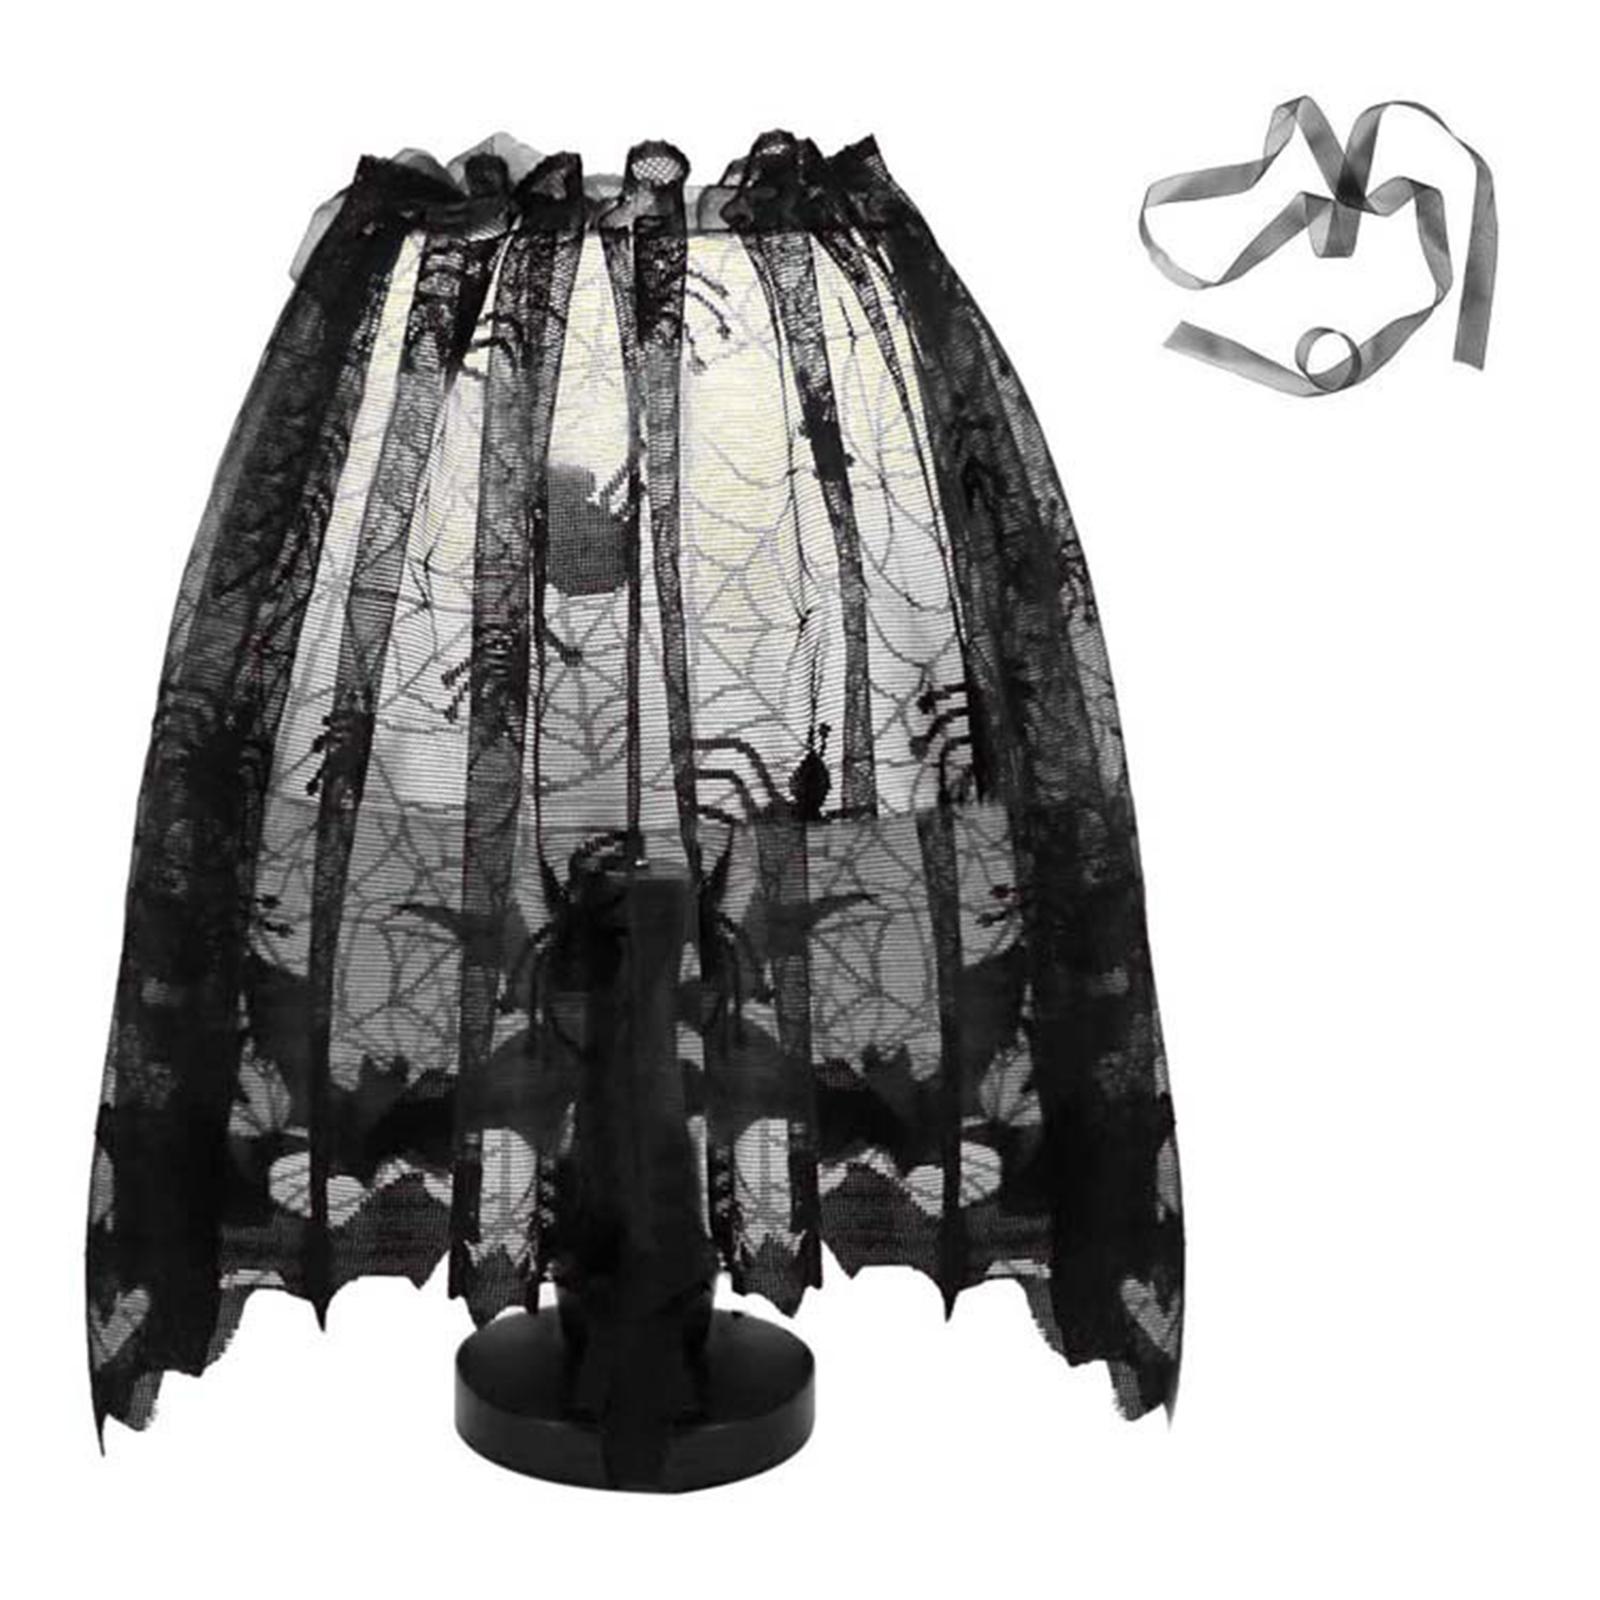 Halloween Tablecloth Decoration Set for Scary Movie Nights Dinner Party